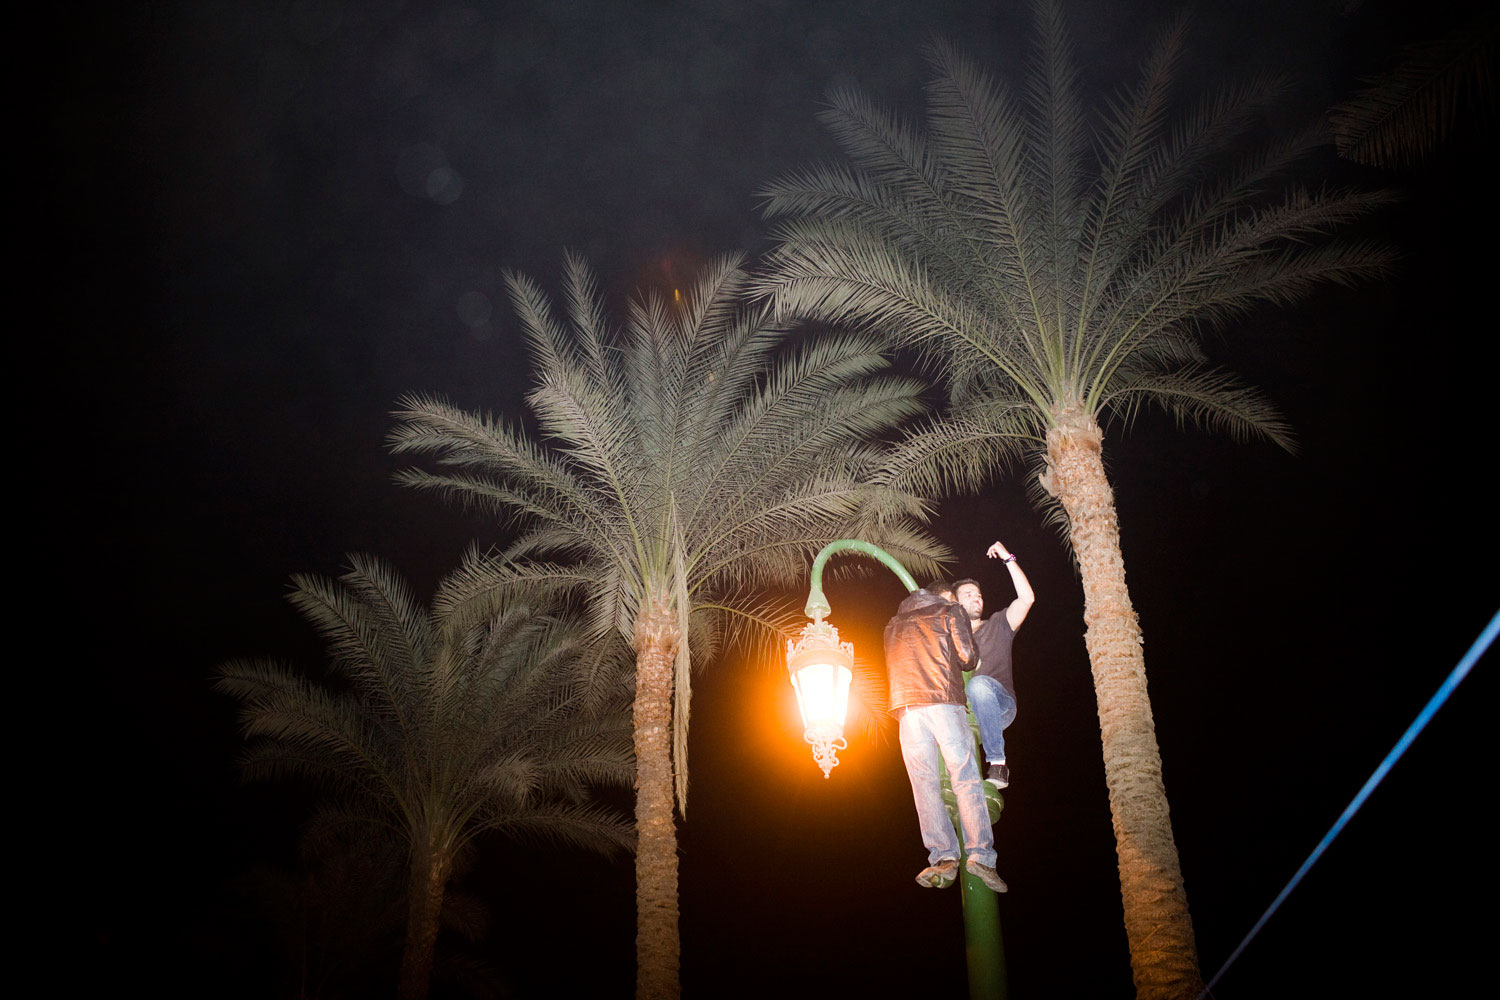 A protestor celebrates on a light pole after the news of Mubarak's resignation spread through the streets of Cairo.